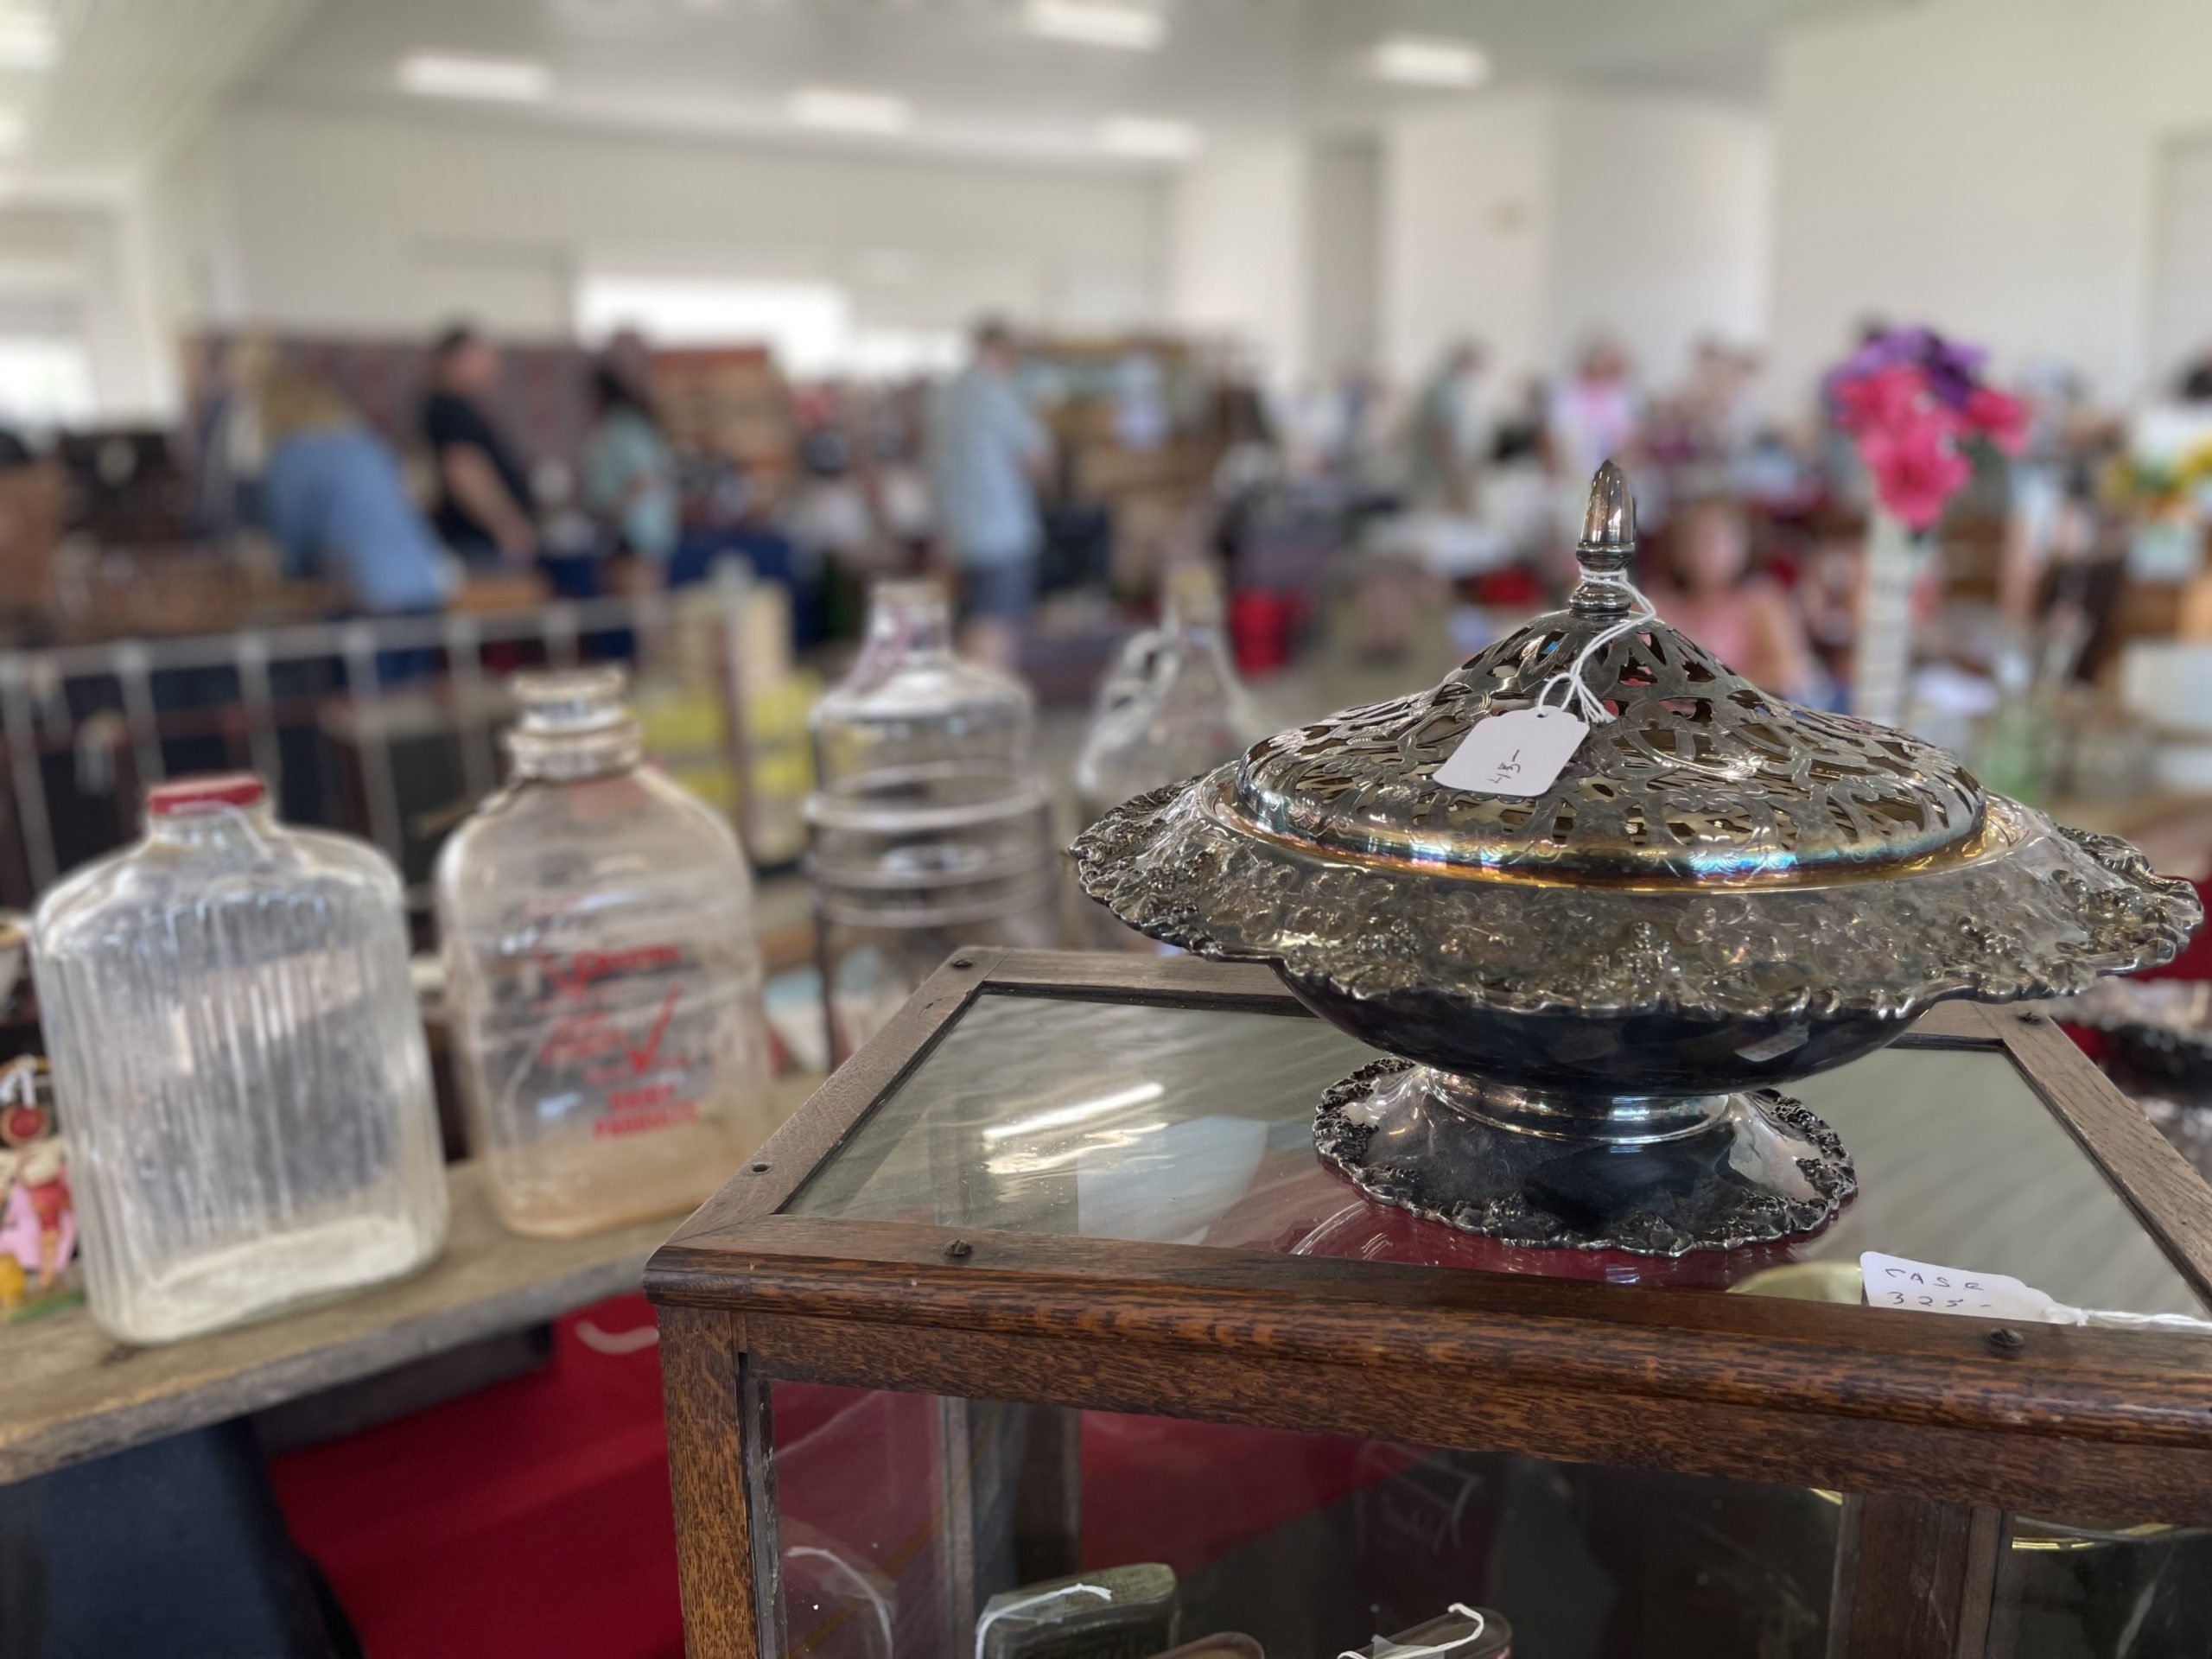 Items for sale at antique and vintage market.